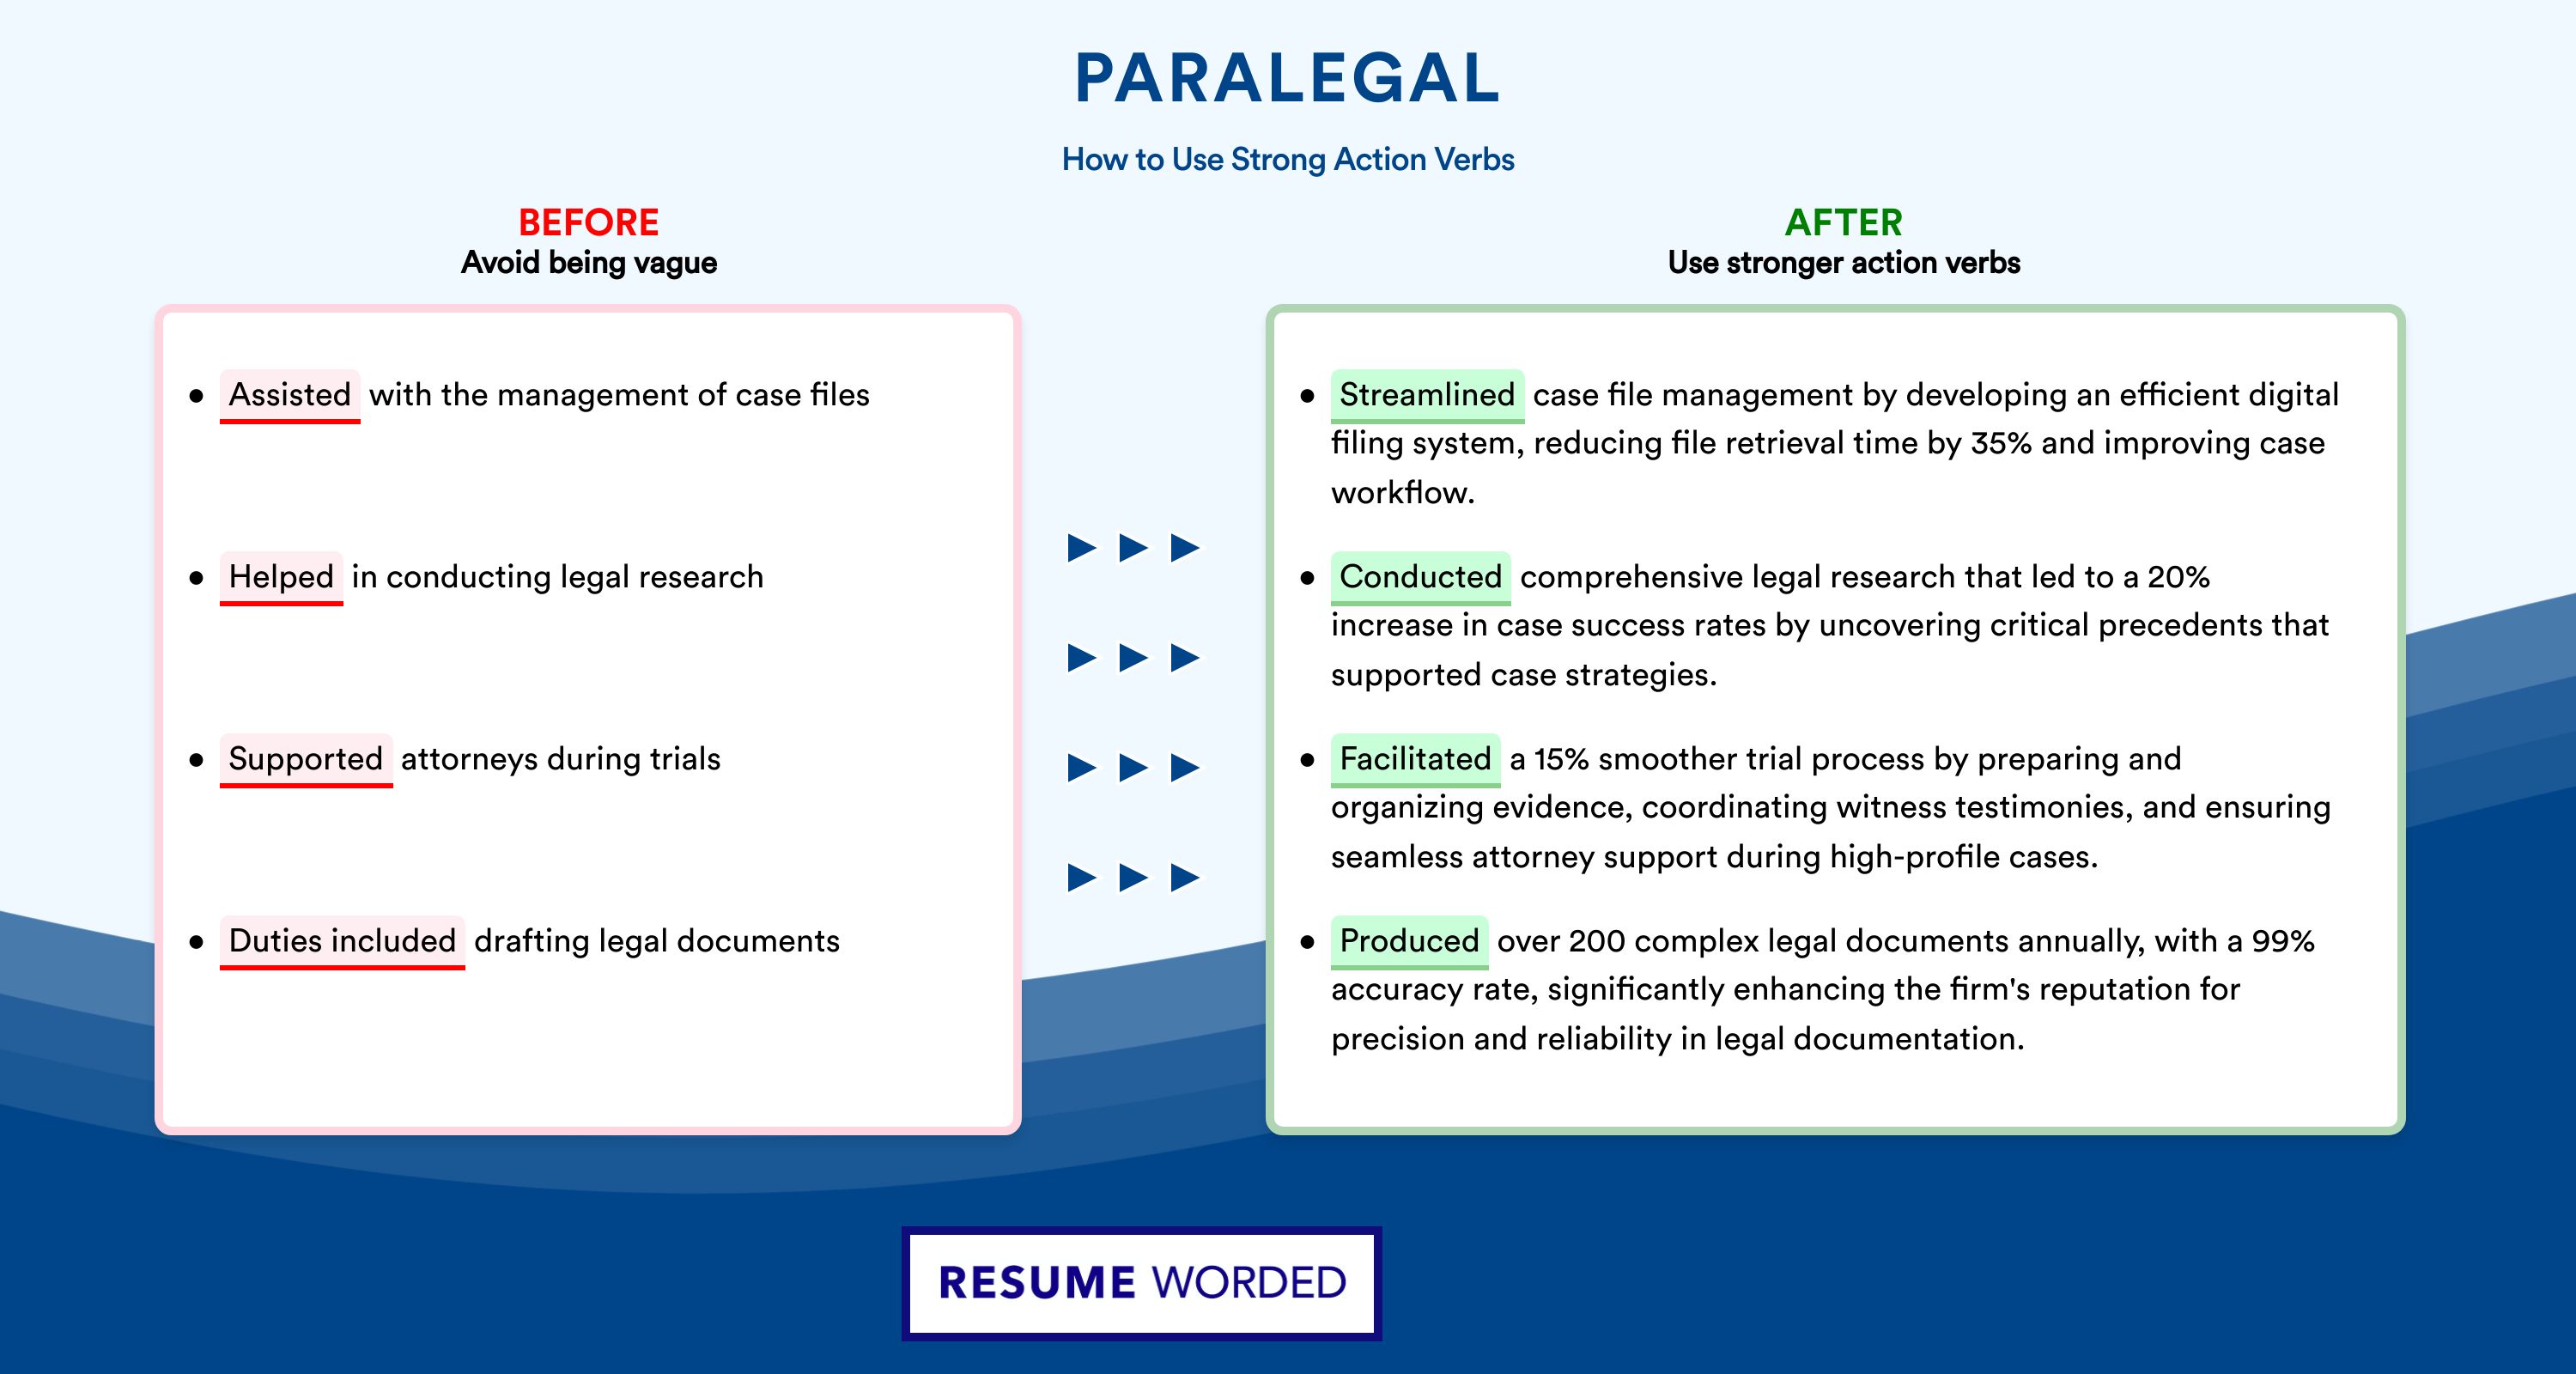 Action Verbs for Paralegal